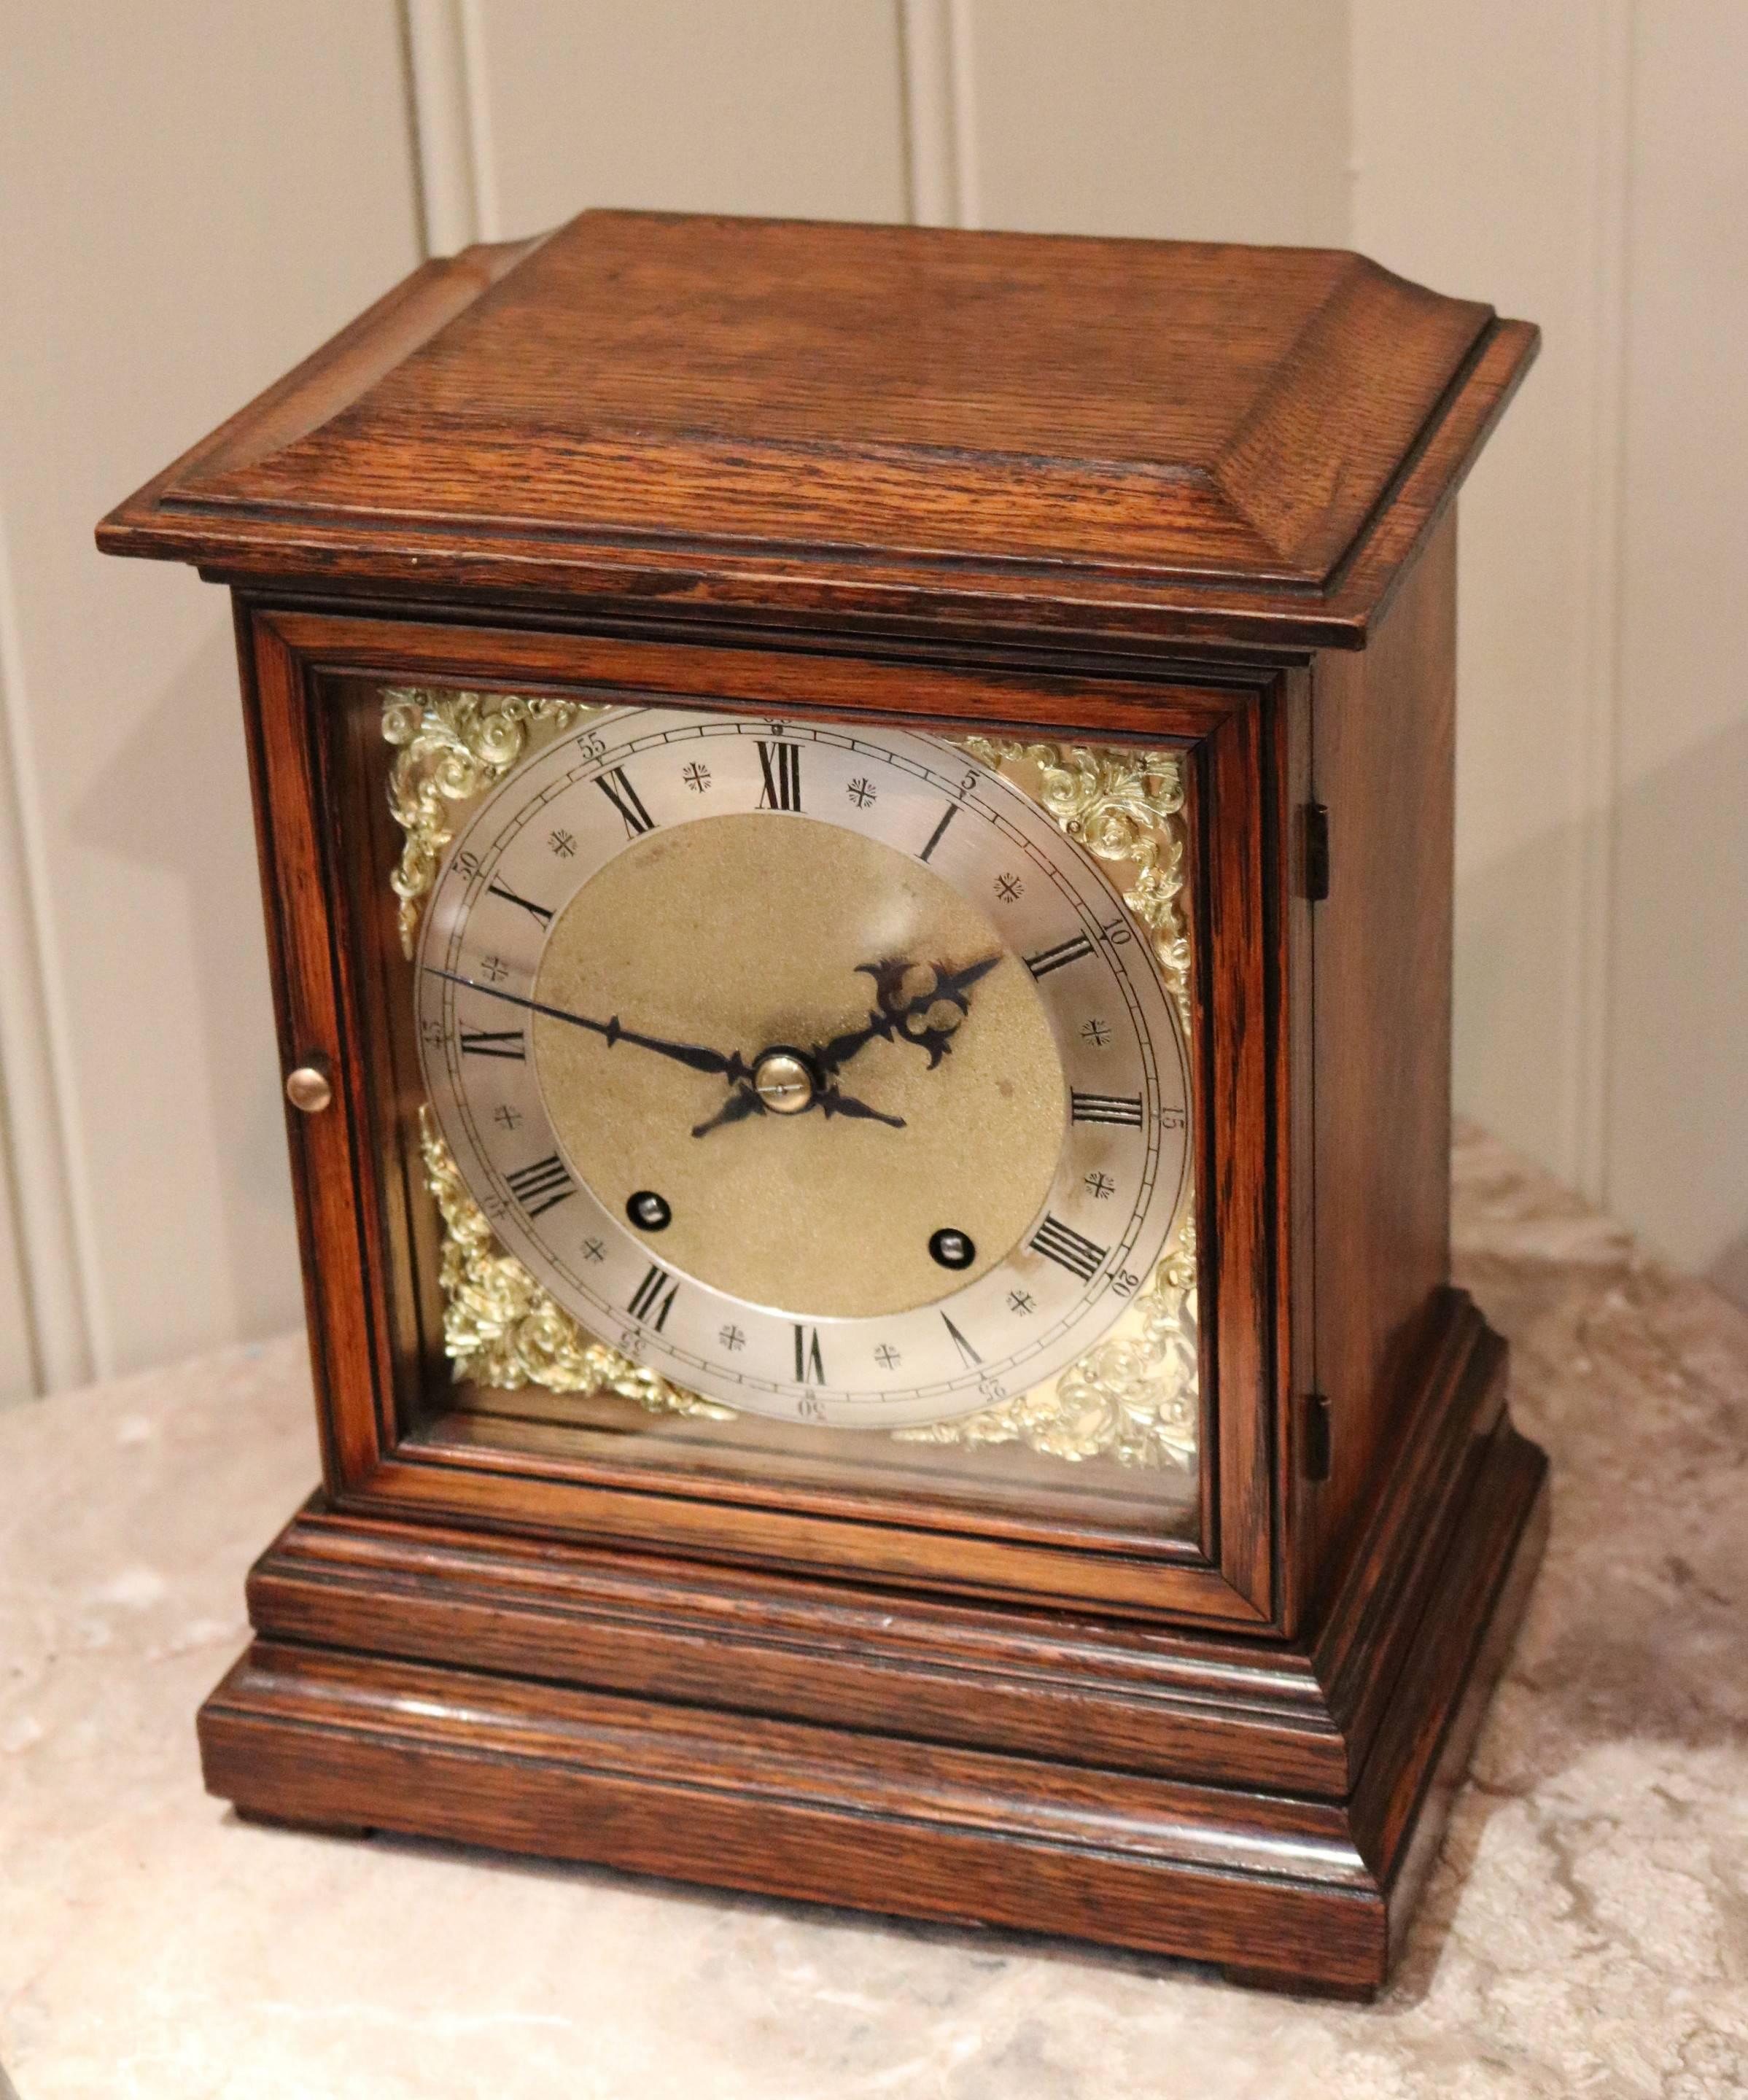 An oak mantel clock dating to the late Victorian period, from around the end of the 19th century. It has a solid oak case of simple form, with a brass dial, silvered chapter ring and brass corner spandrels. It has an 8 day movement that strikes the